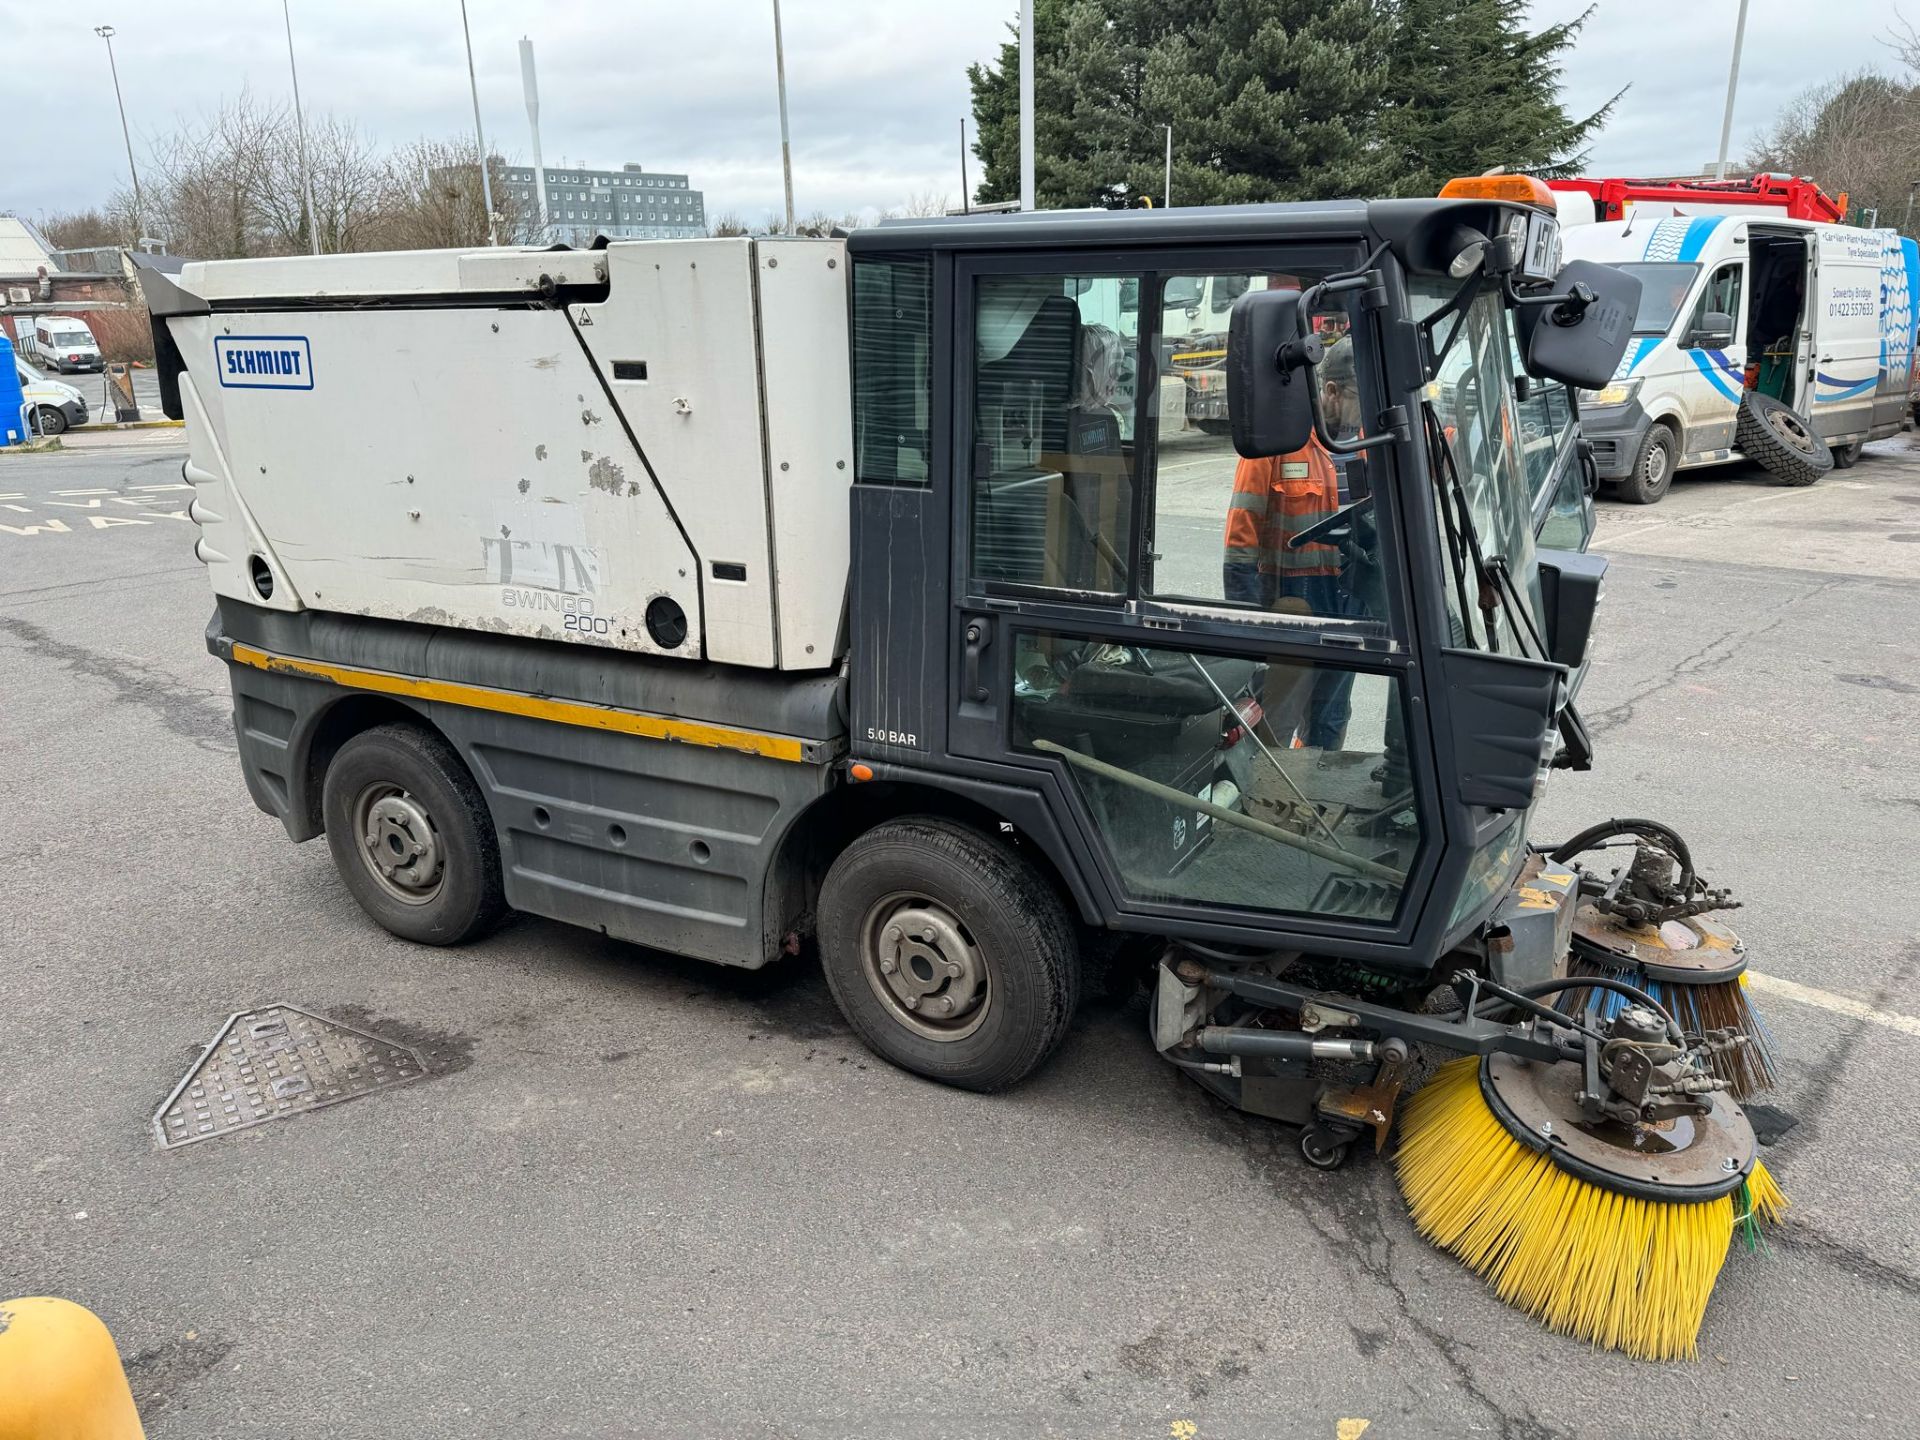 2017, SCHMIDT - Compact 200 Road Sweeper (Ex-Council fleet owned and maintained)